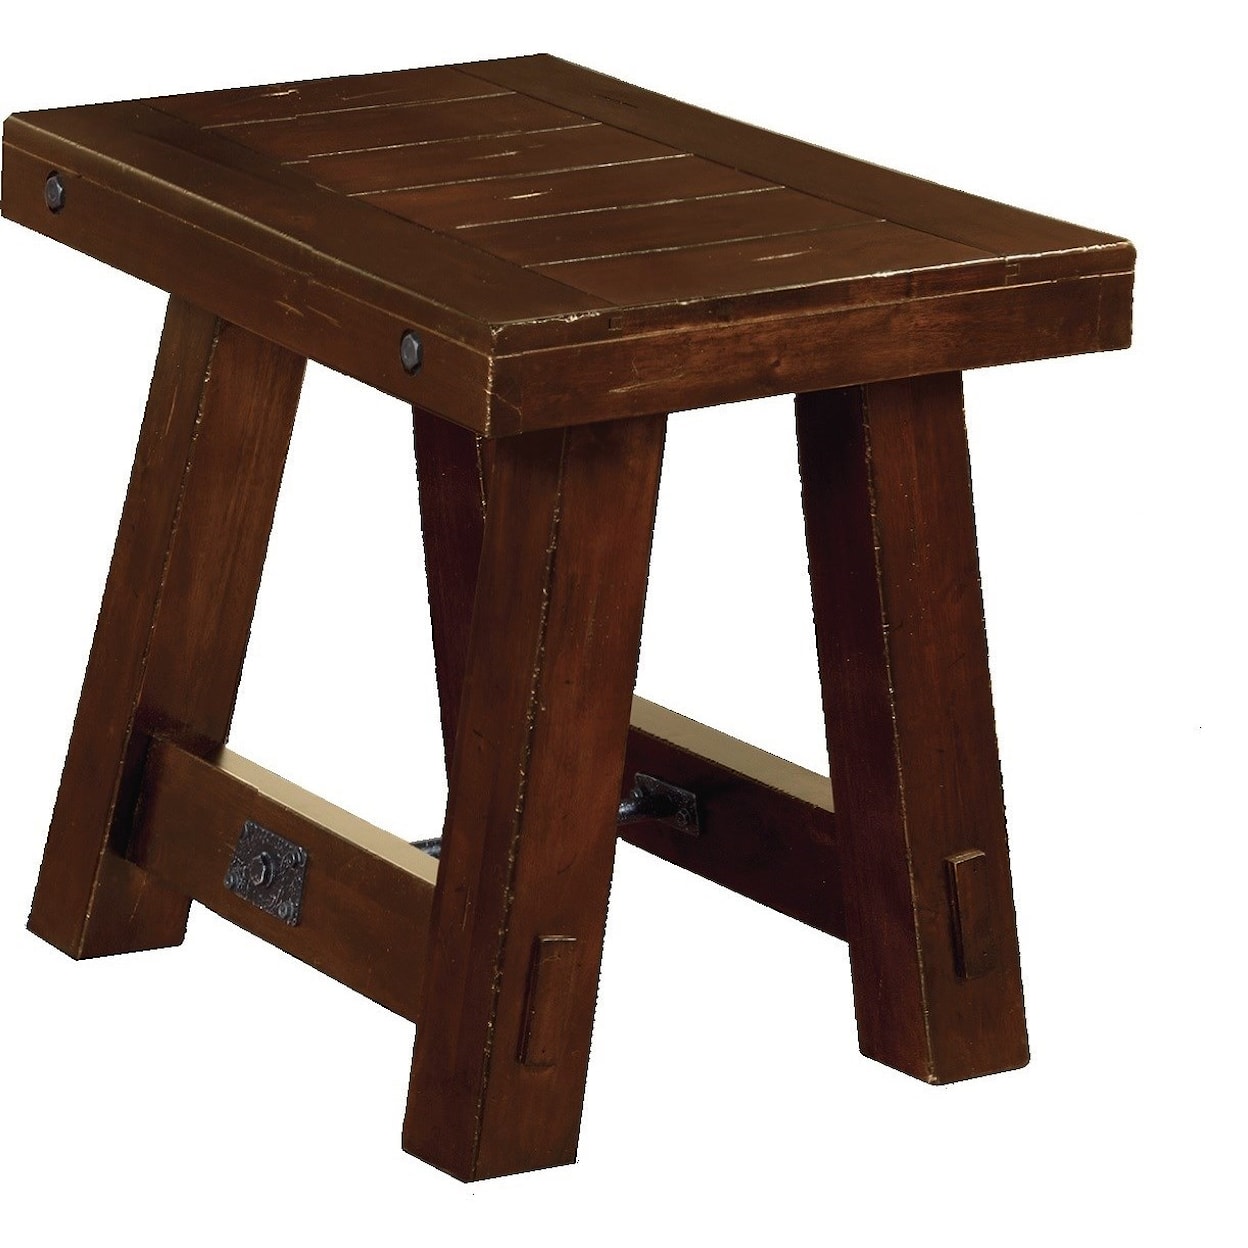 Sunny Designs Tuscany Chair Side Table